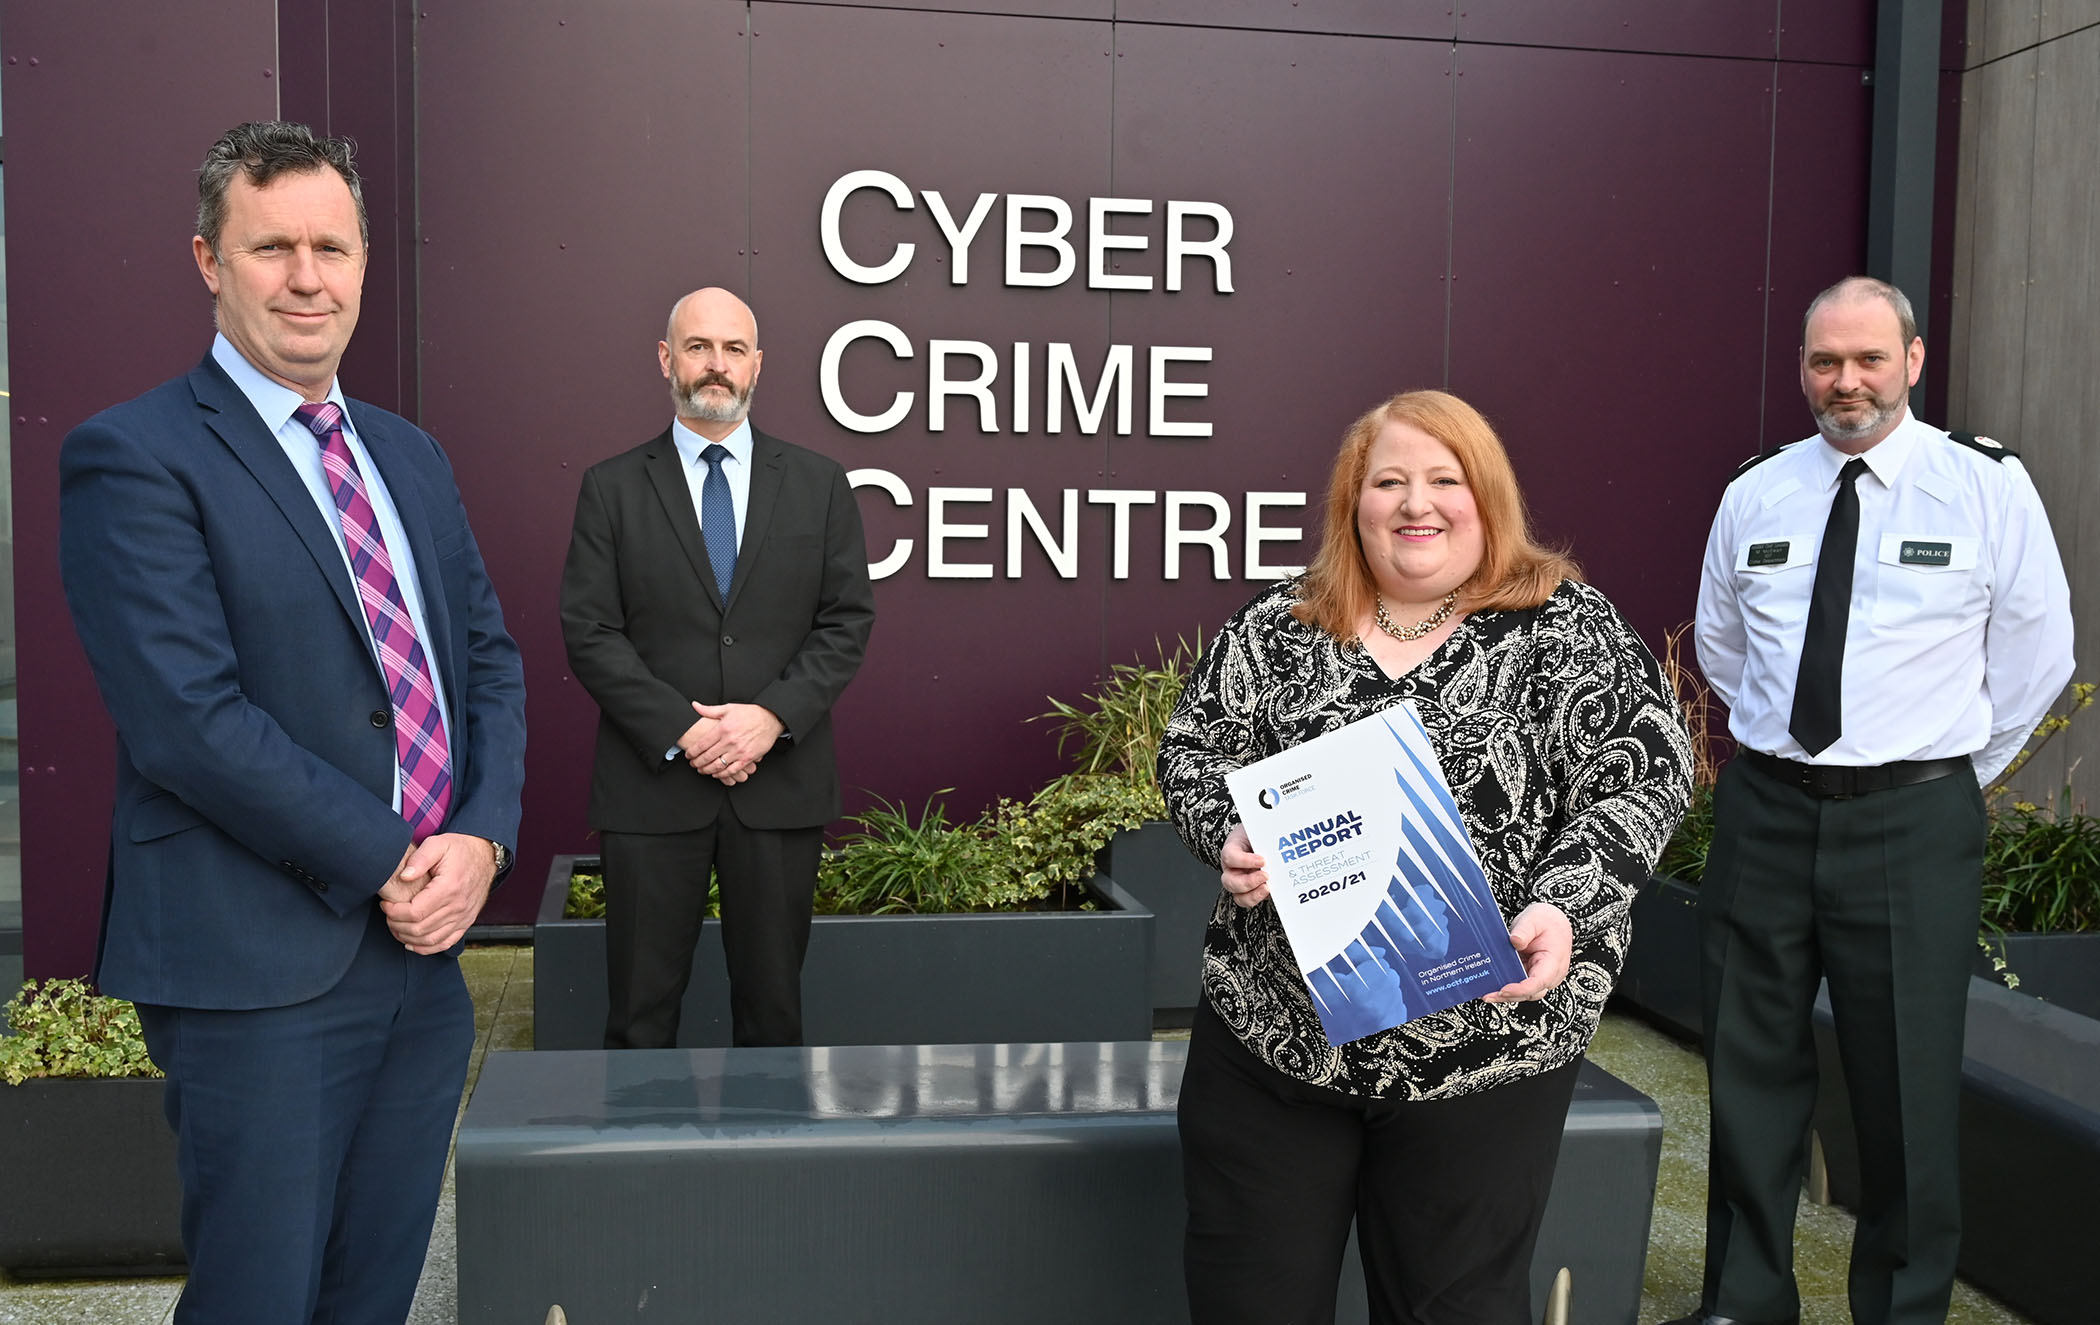 Justice Minister pictured with Cyber Crime staff